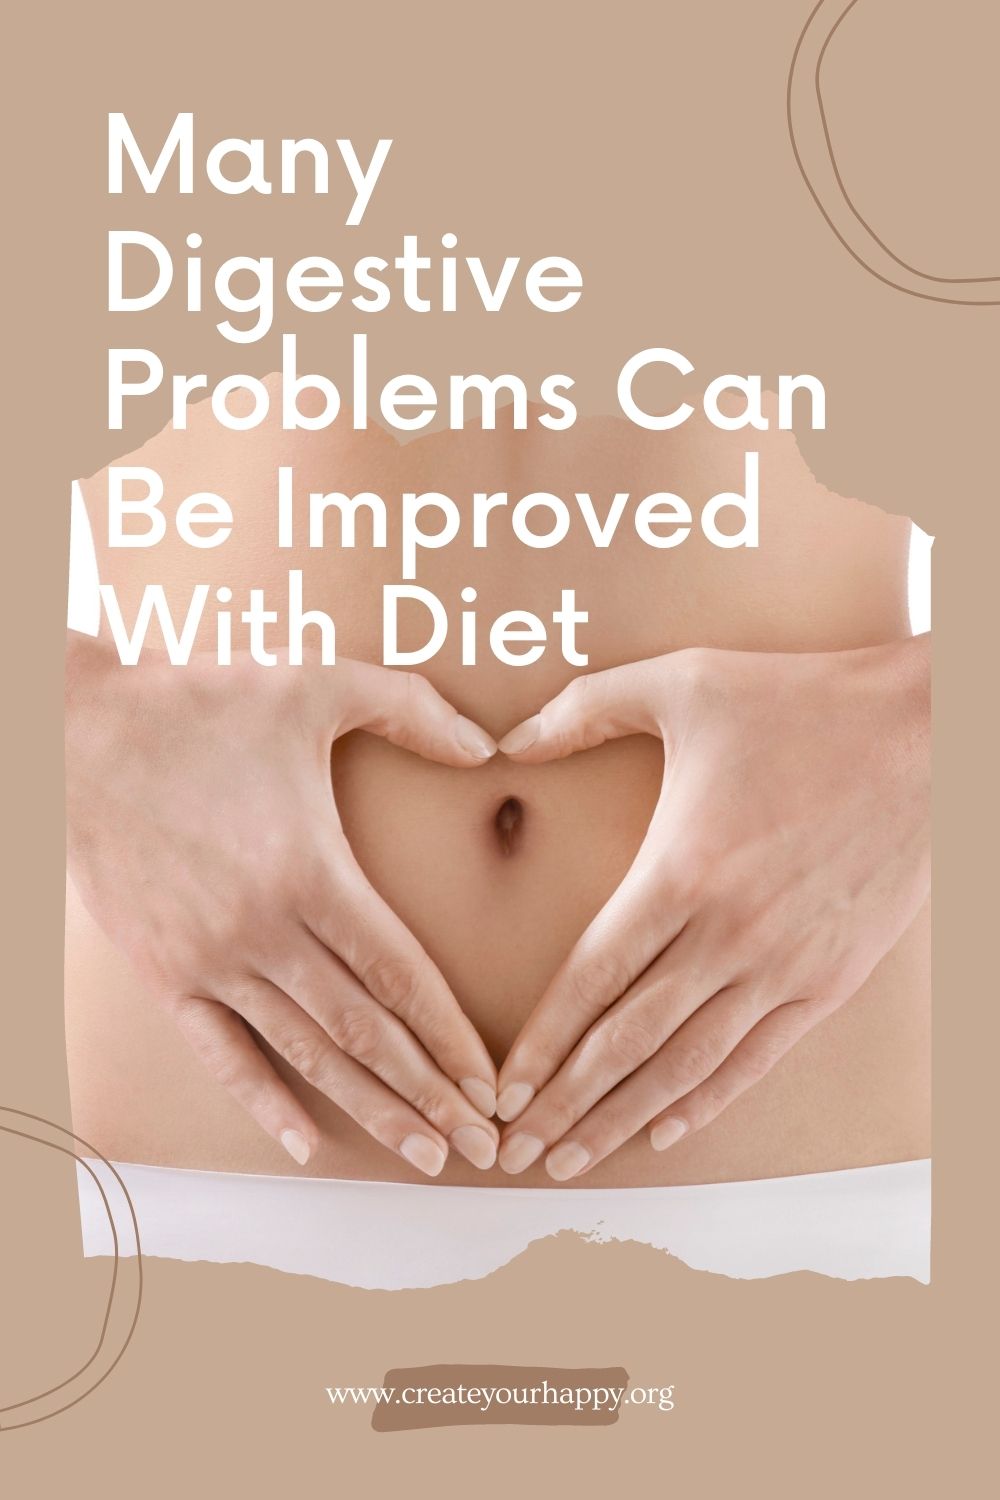 Many Digestive Problems Can Be Improved With Diet